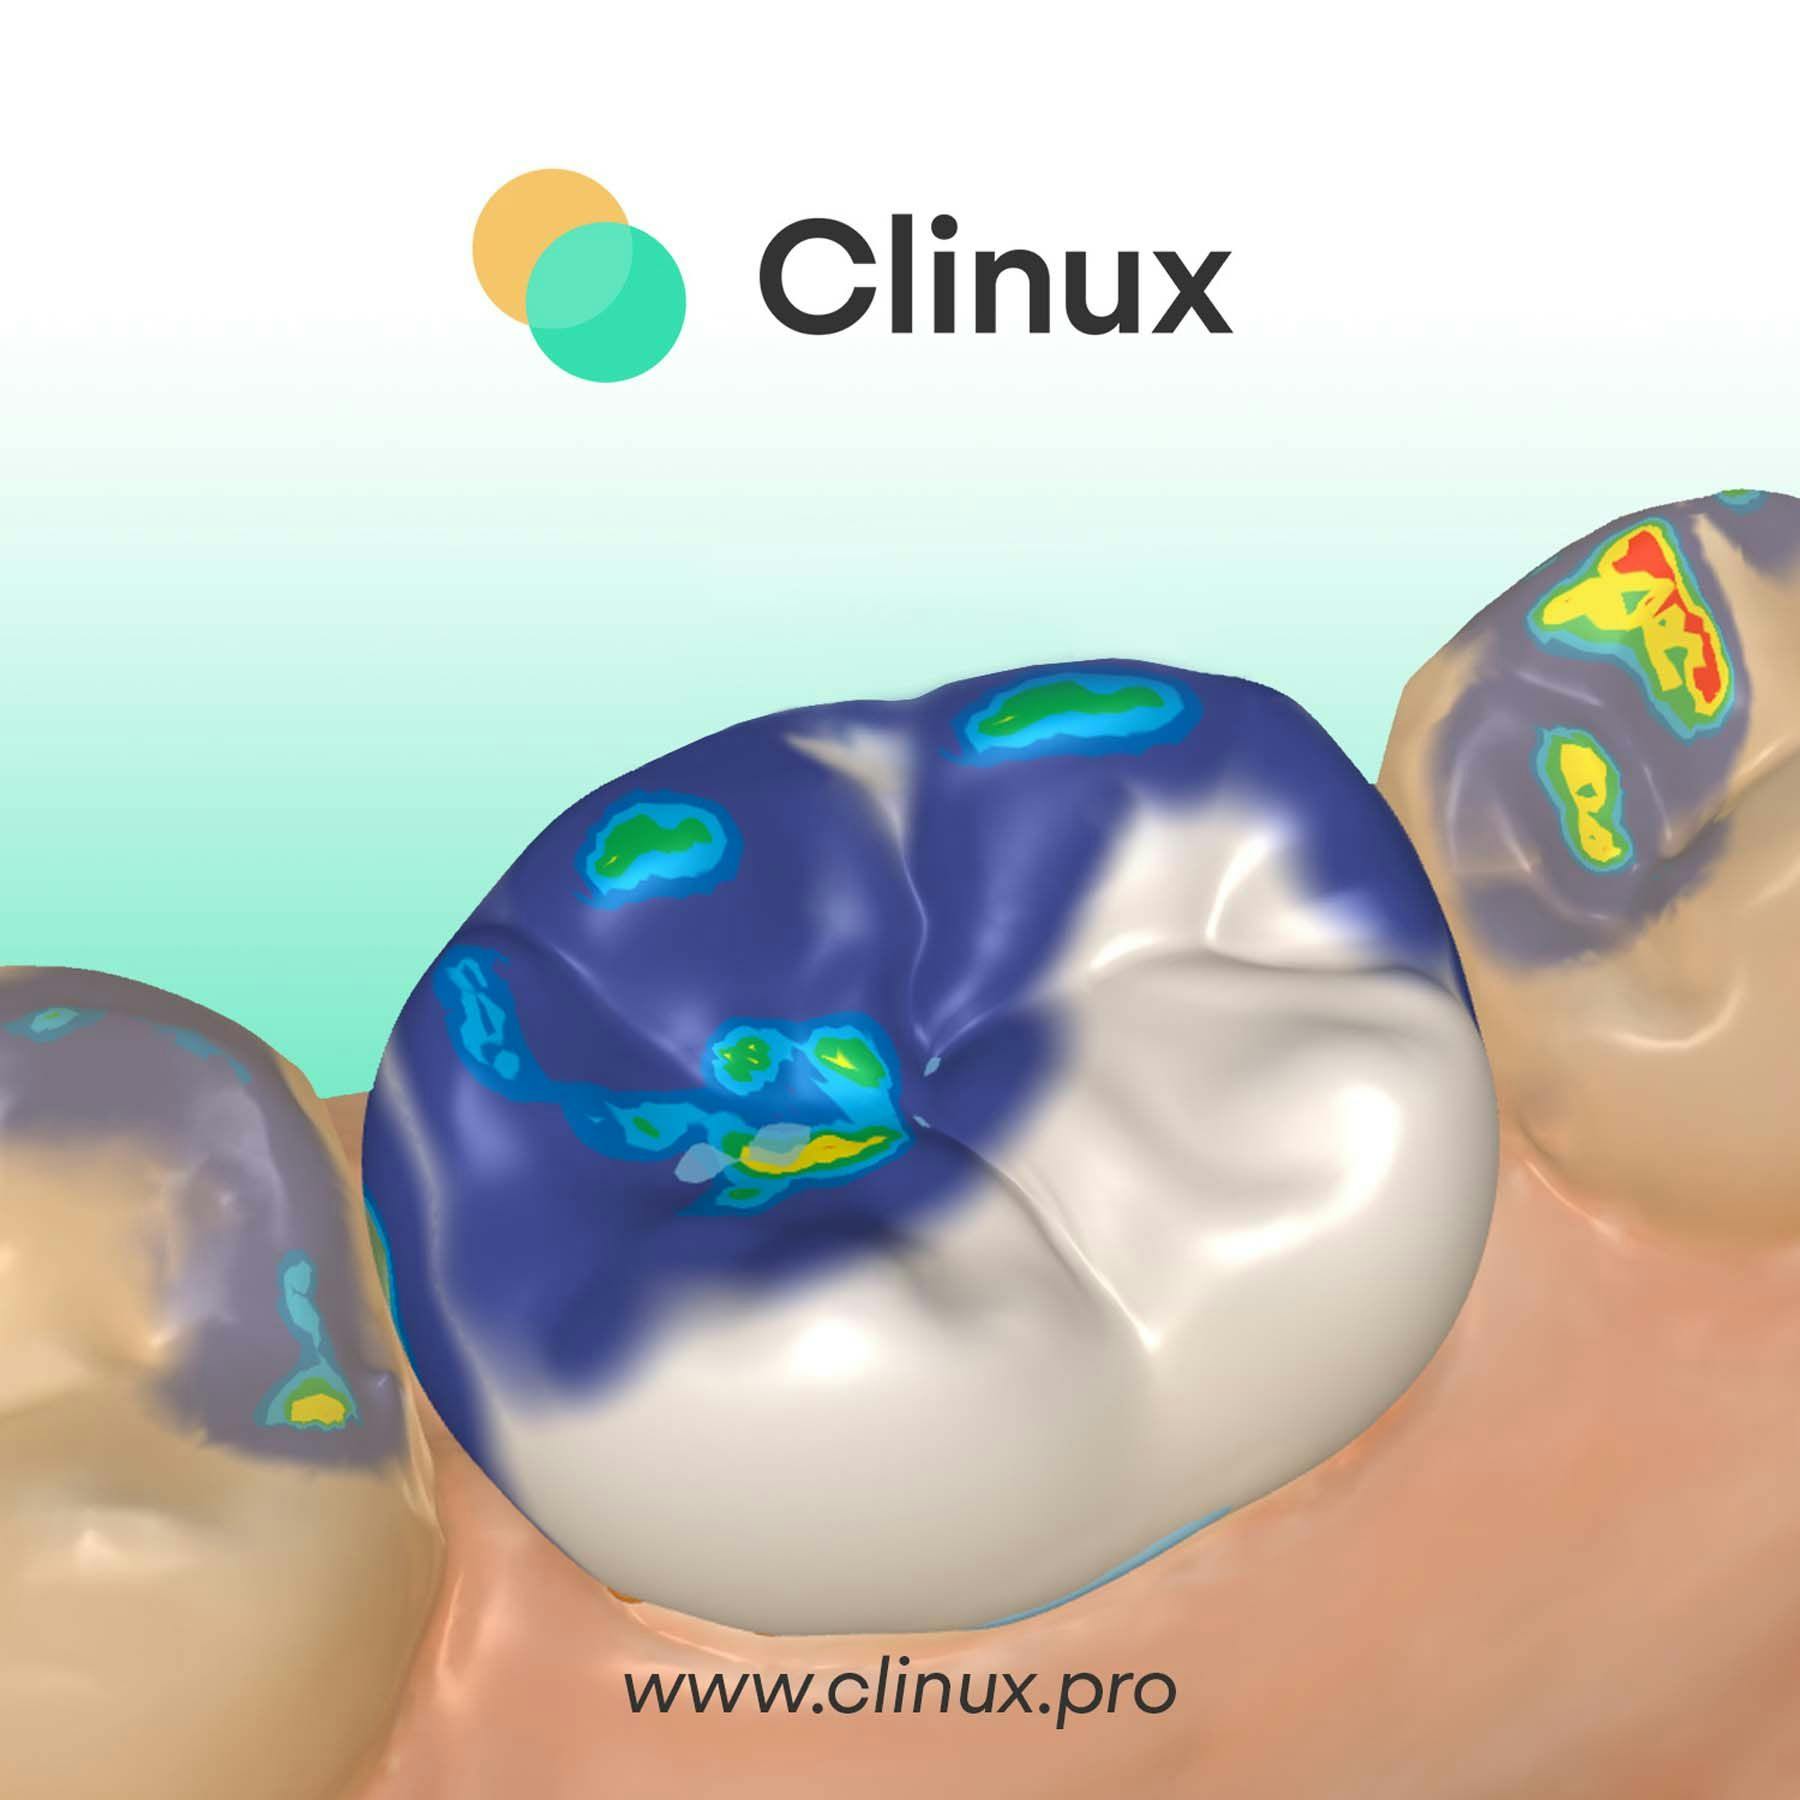 Clinux CAD Announces Expanded Range of Capabilities | Image Credit: © Clinux 